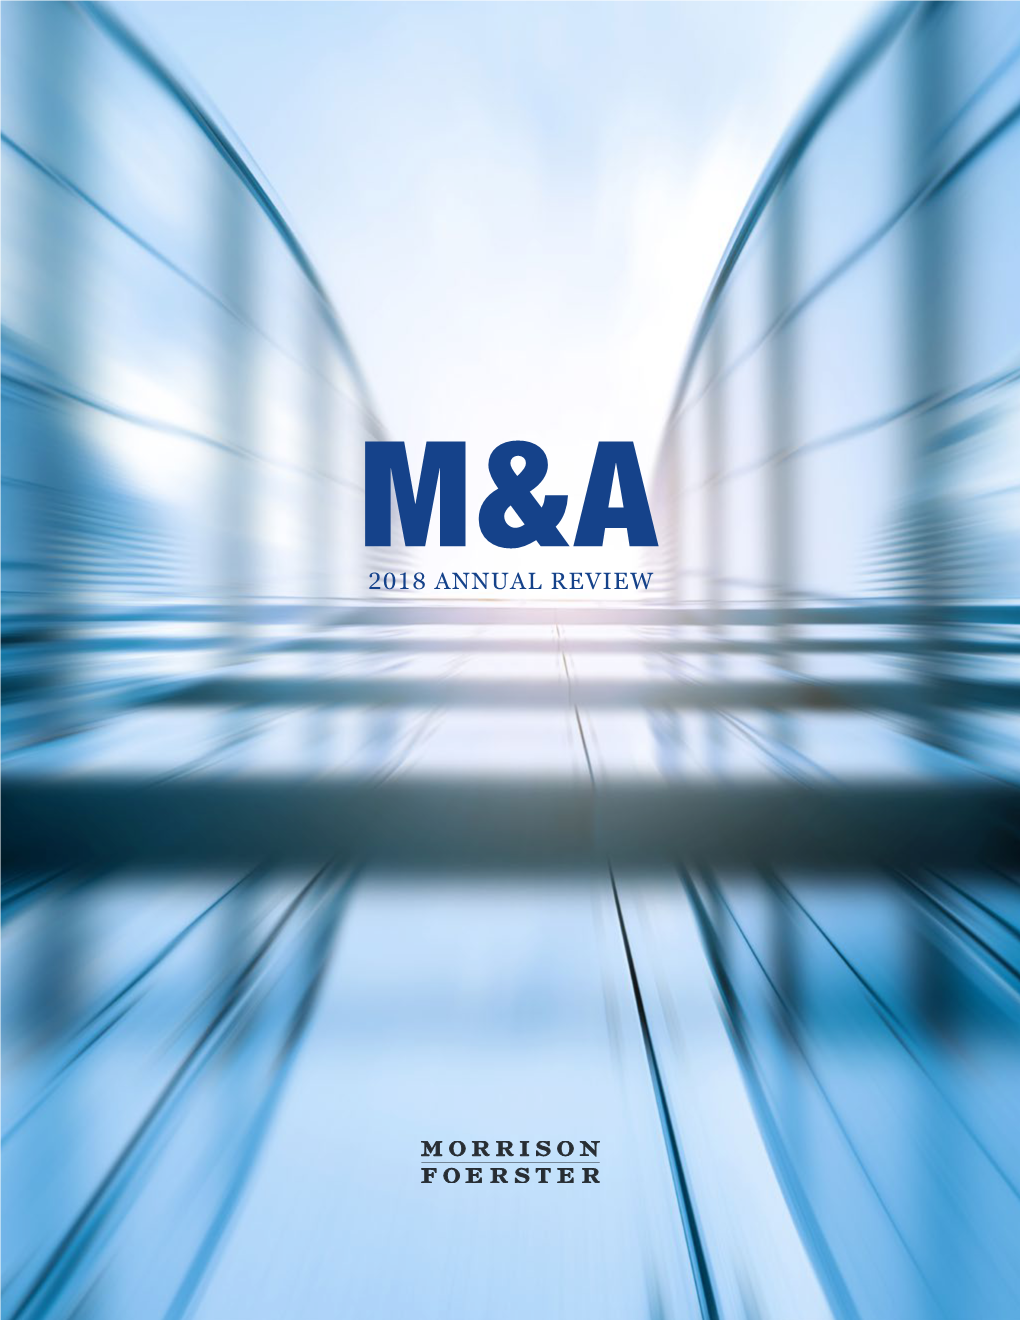 M&A 2018 Annual Review